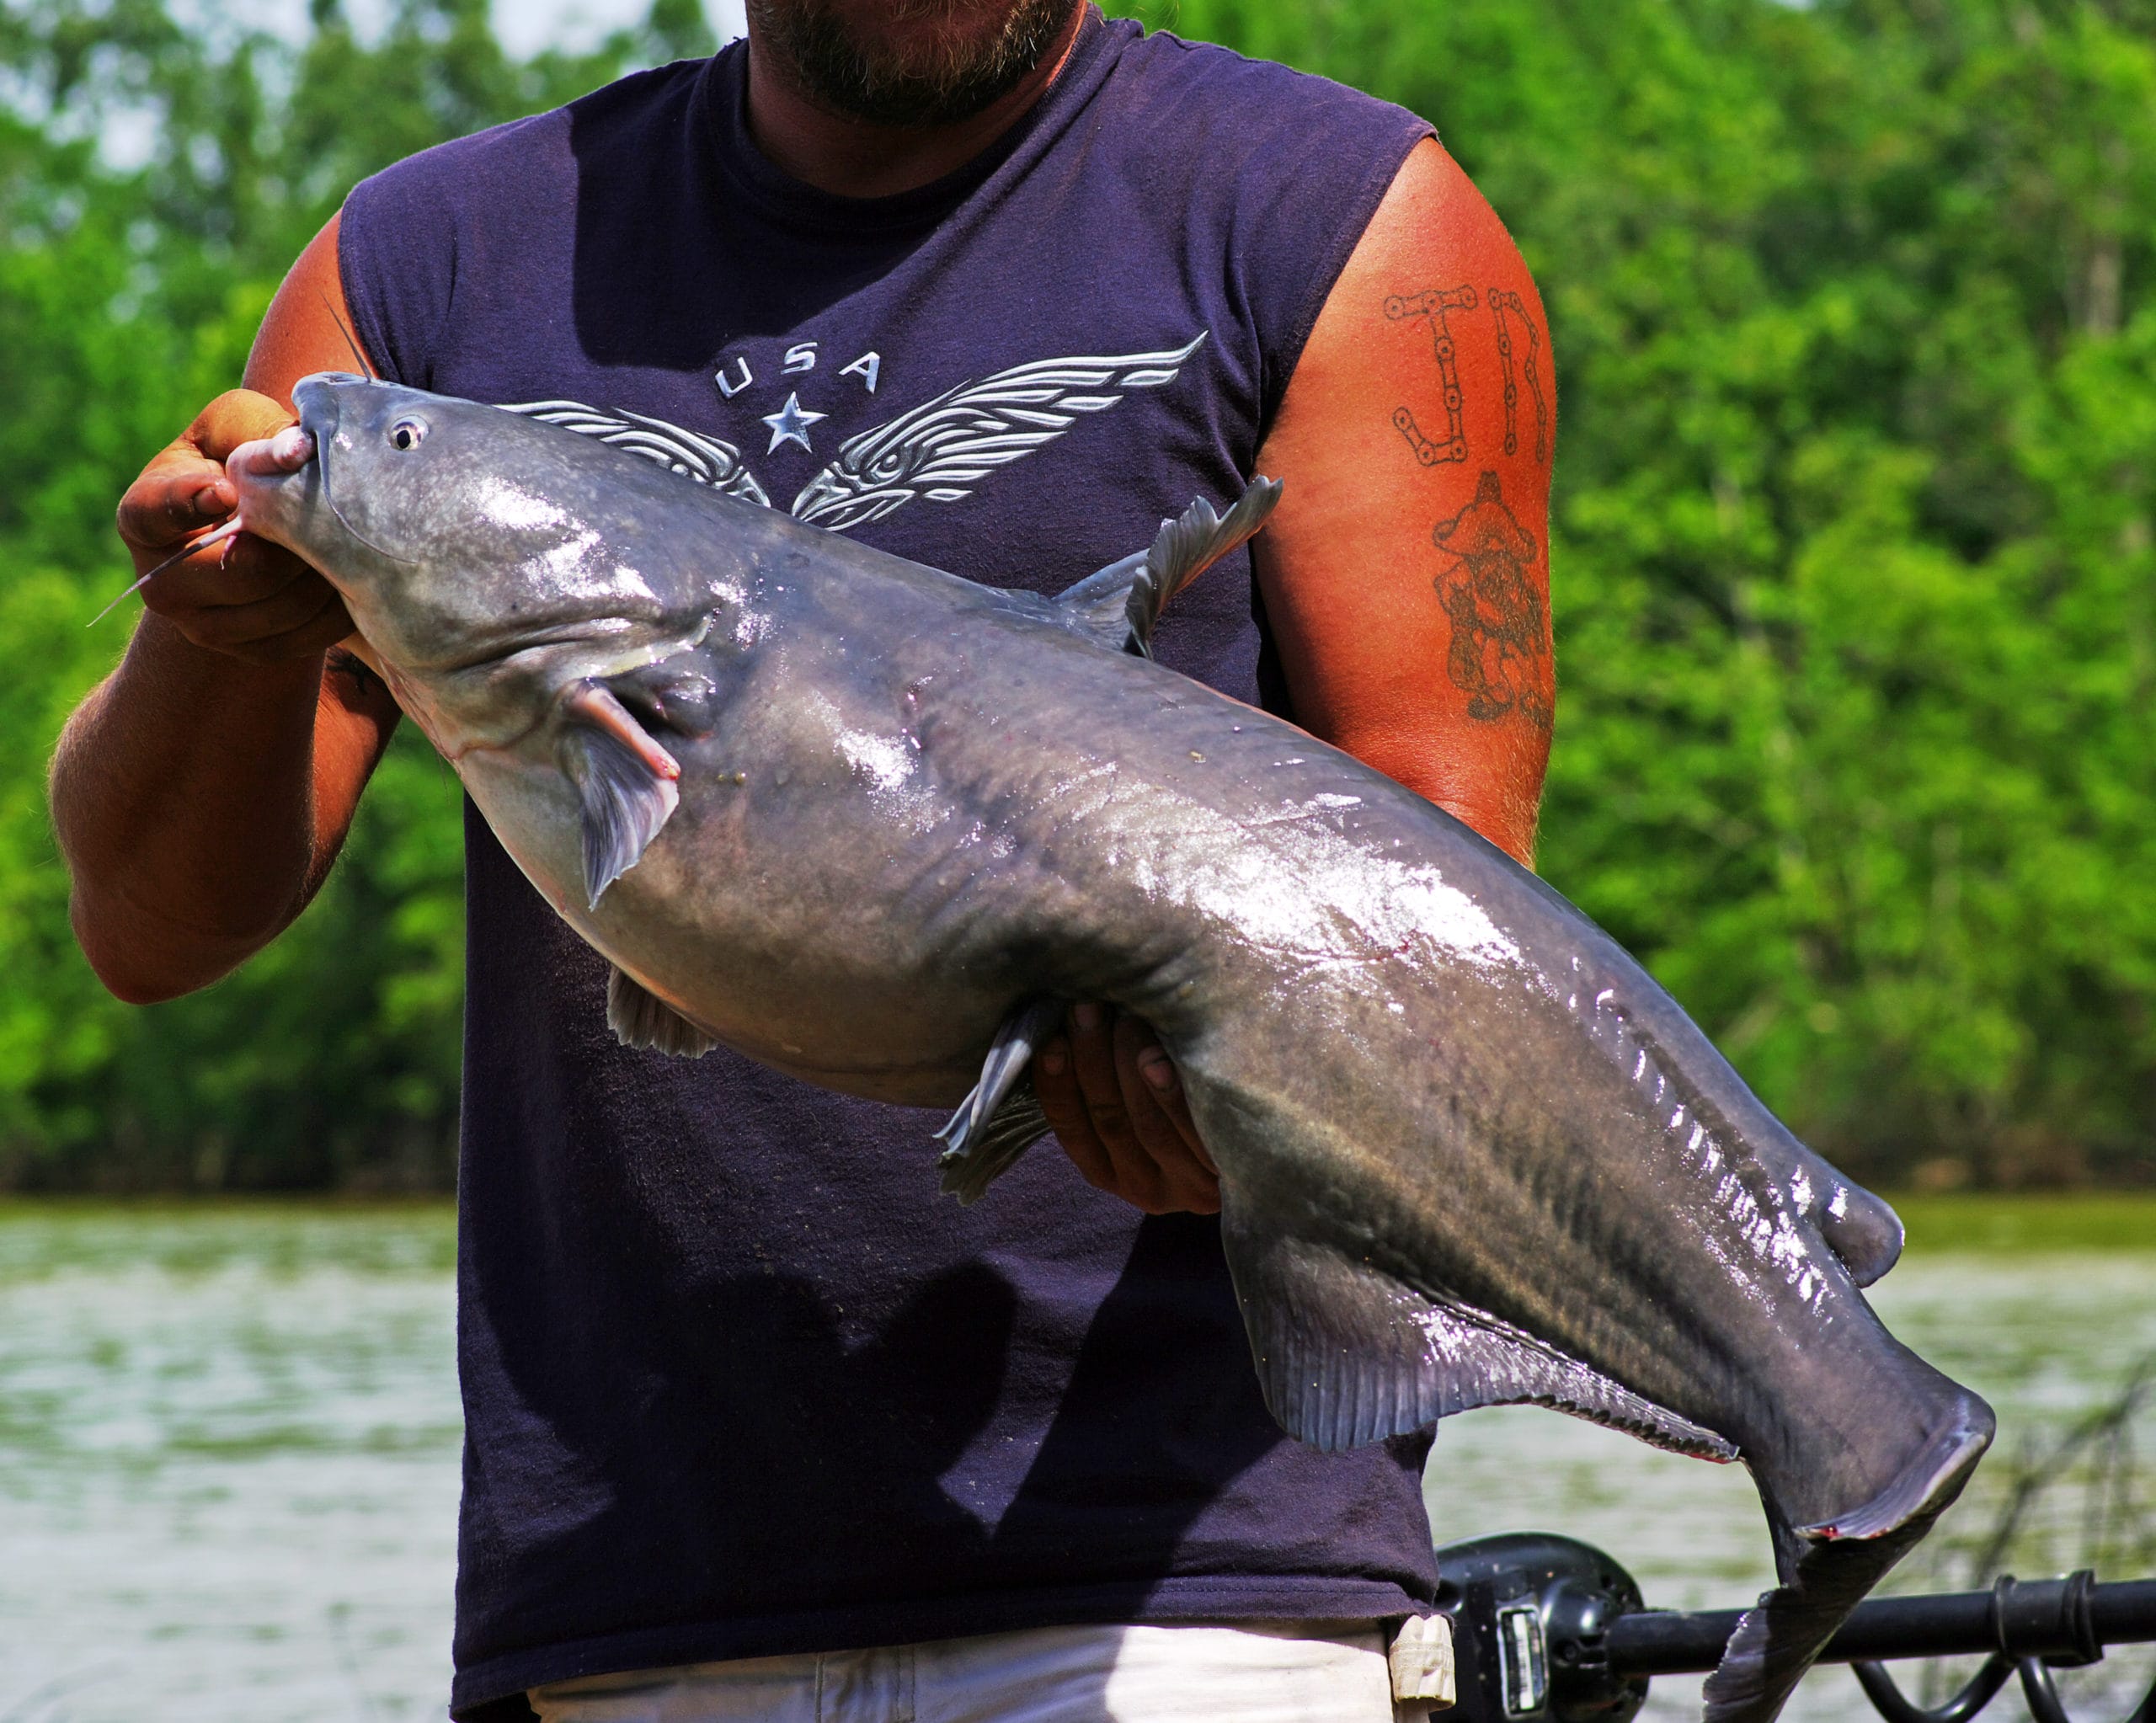 Whether you favorite fishing holes contains channel catfish, flatheads, or “pretty” blue catfish like this, the late spring spawn is a prime time to find catfish shallow and feeding aggressively. 